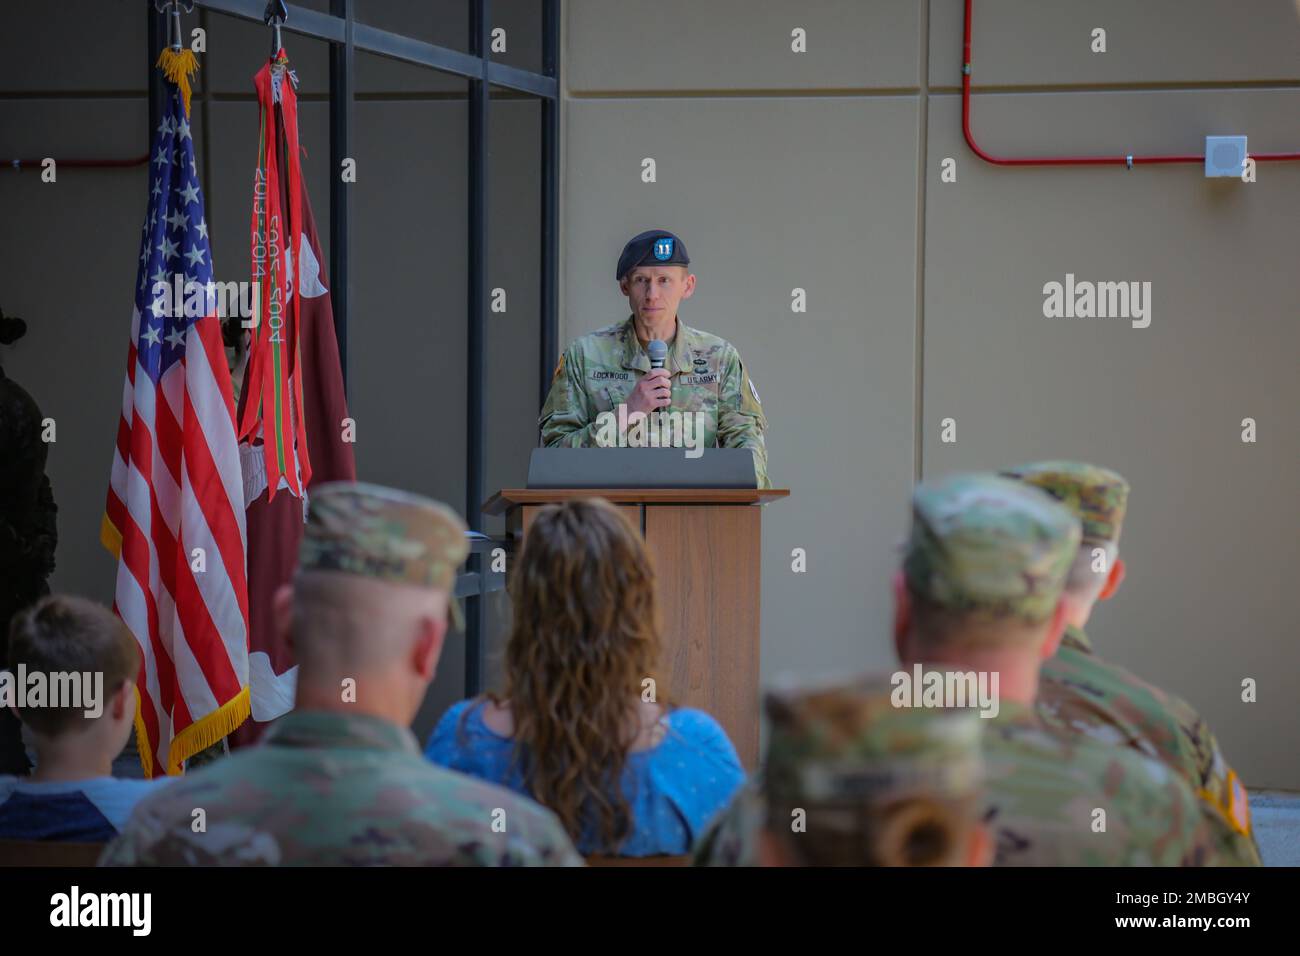 Blanchfield Army Community Hospital’s Medical Department Activity (MEDDAC) company held a Change of Command ceremony June 15, 2022, at Fort Campbell, Kentucky, where Capt. Huy T. Nguyen relinquished command to Capt. Joshua J. Lockwood. Stock Photo